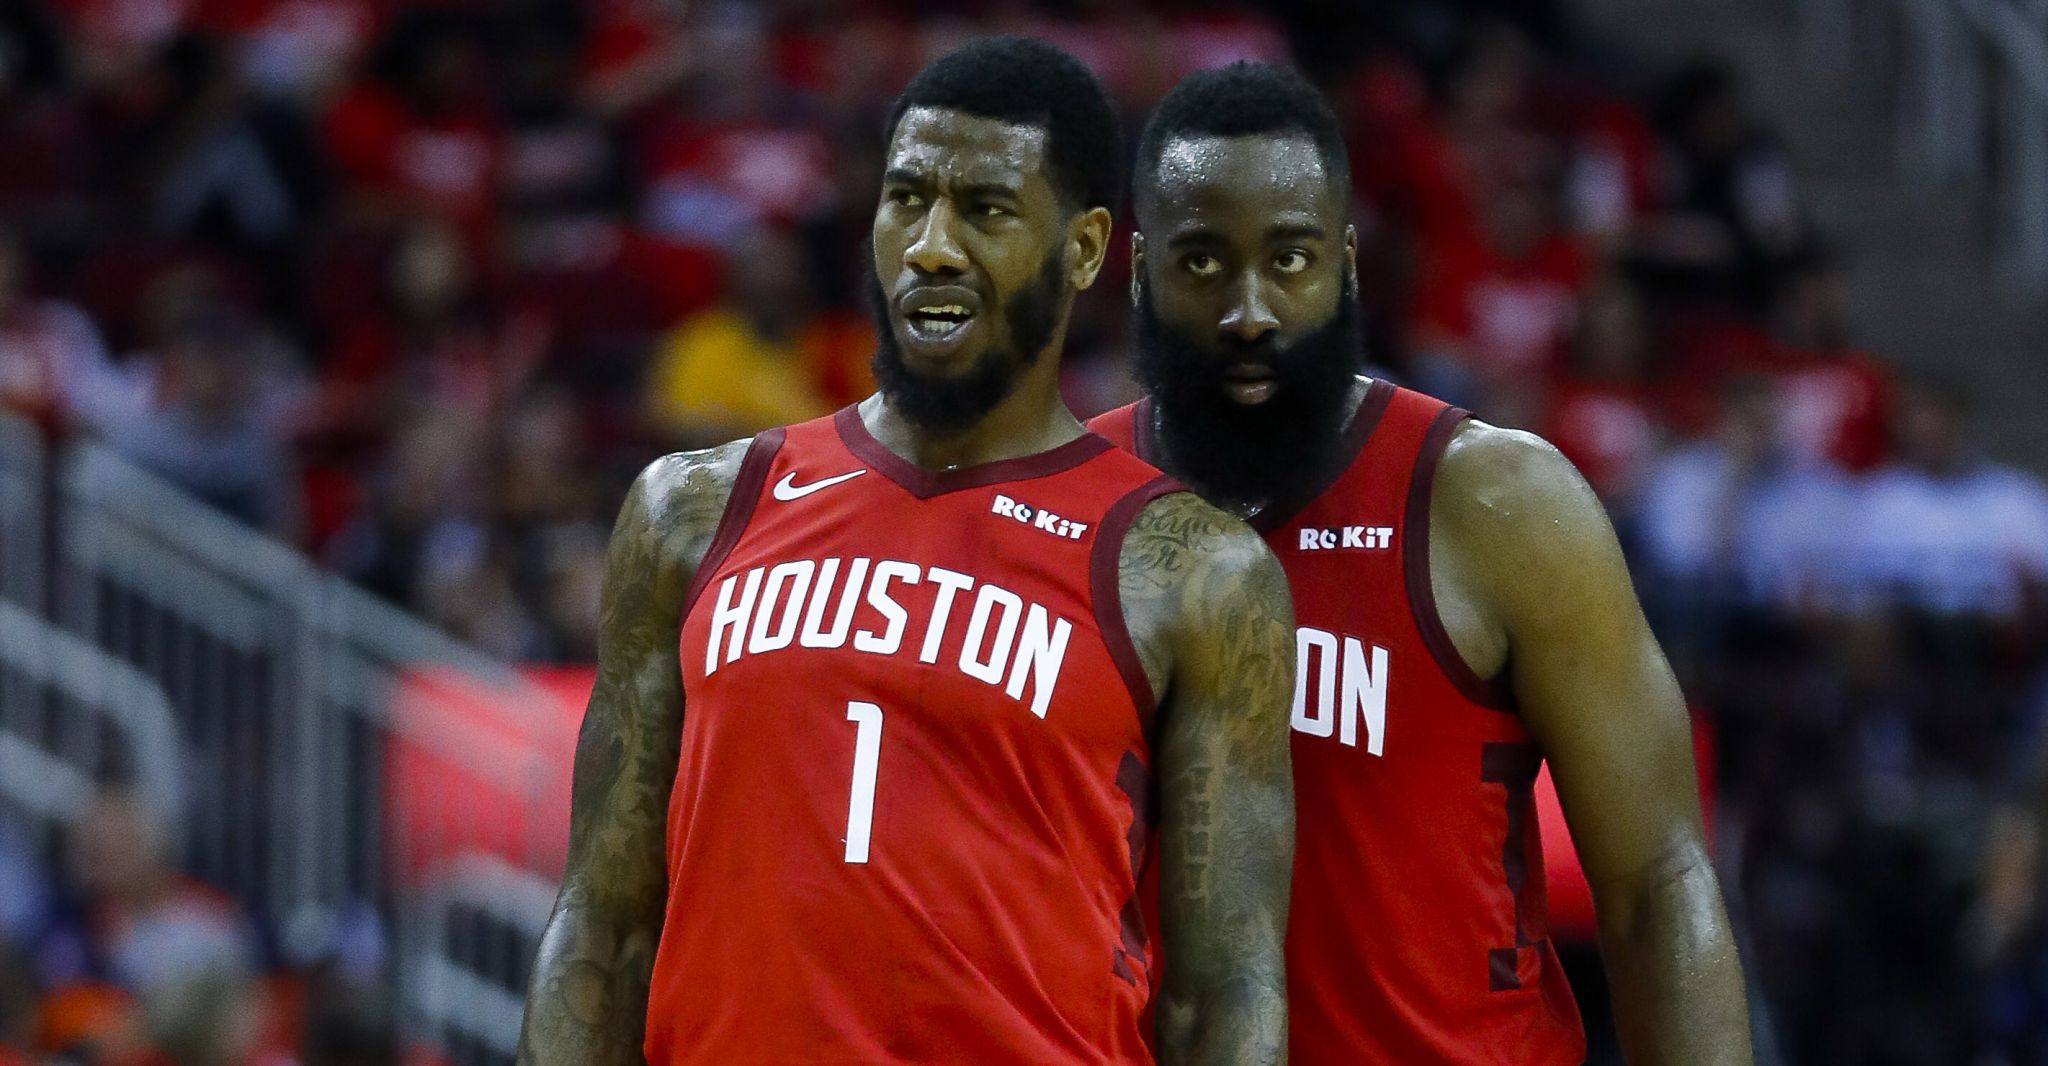 Rockets Twitter Account Suspended Due To Copyright Complaints